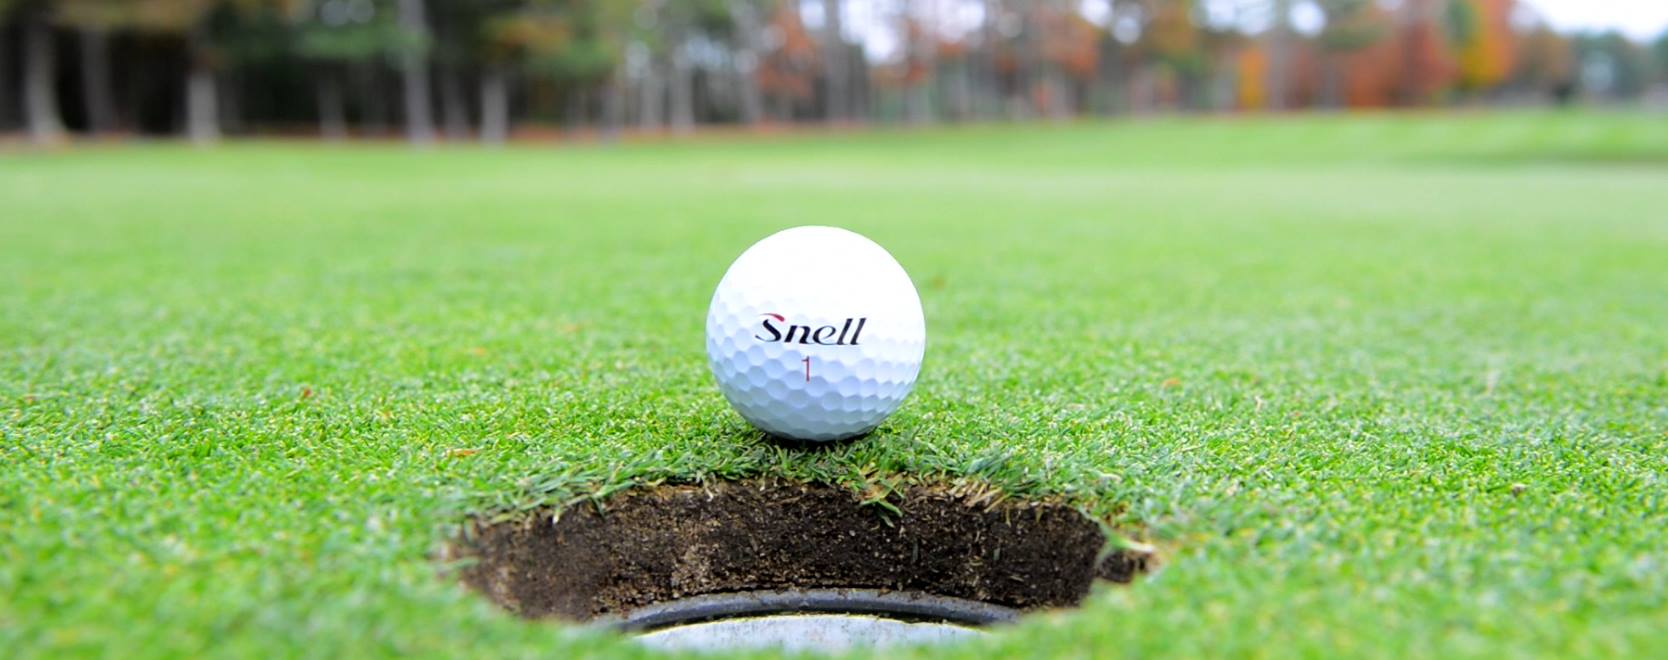 Snell Golf: Innovation Meets Motivation – New Bedford Guide